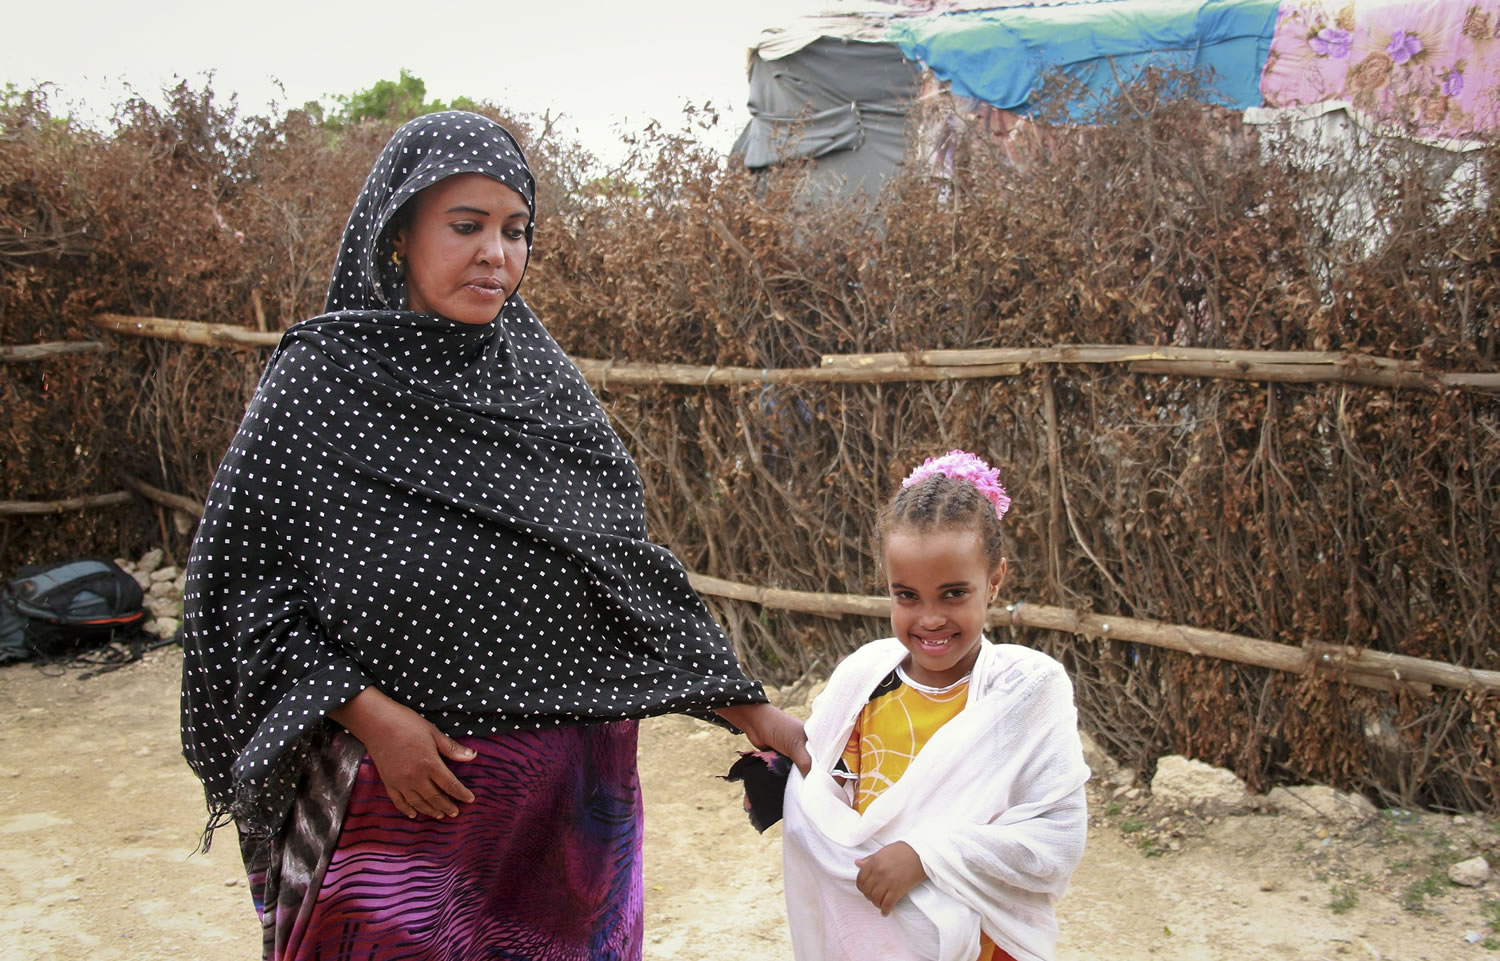 Ubah Mohammed Abdule, 33, left, walks with her daughter, Neshad Yusuf Ahmed, 5, right, outside her hut in the Shedder refugee camp near the town of Jigjiga, in far eastern Ethiopia.